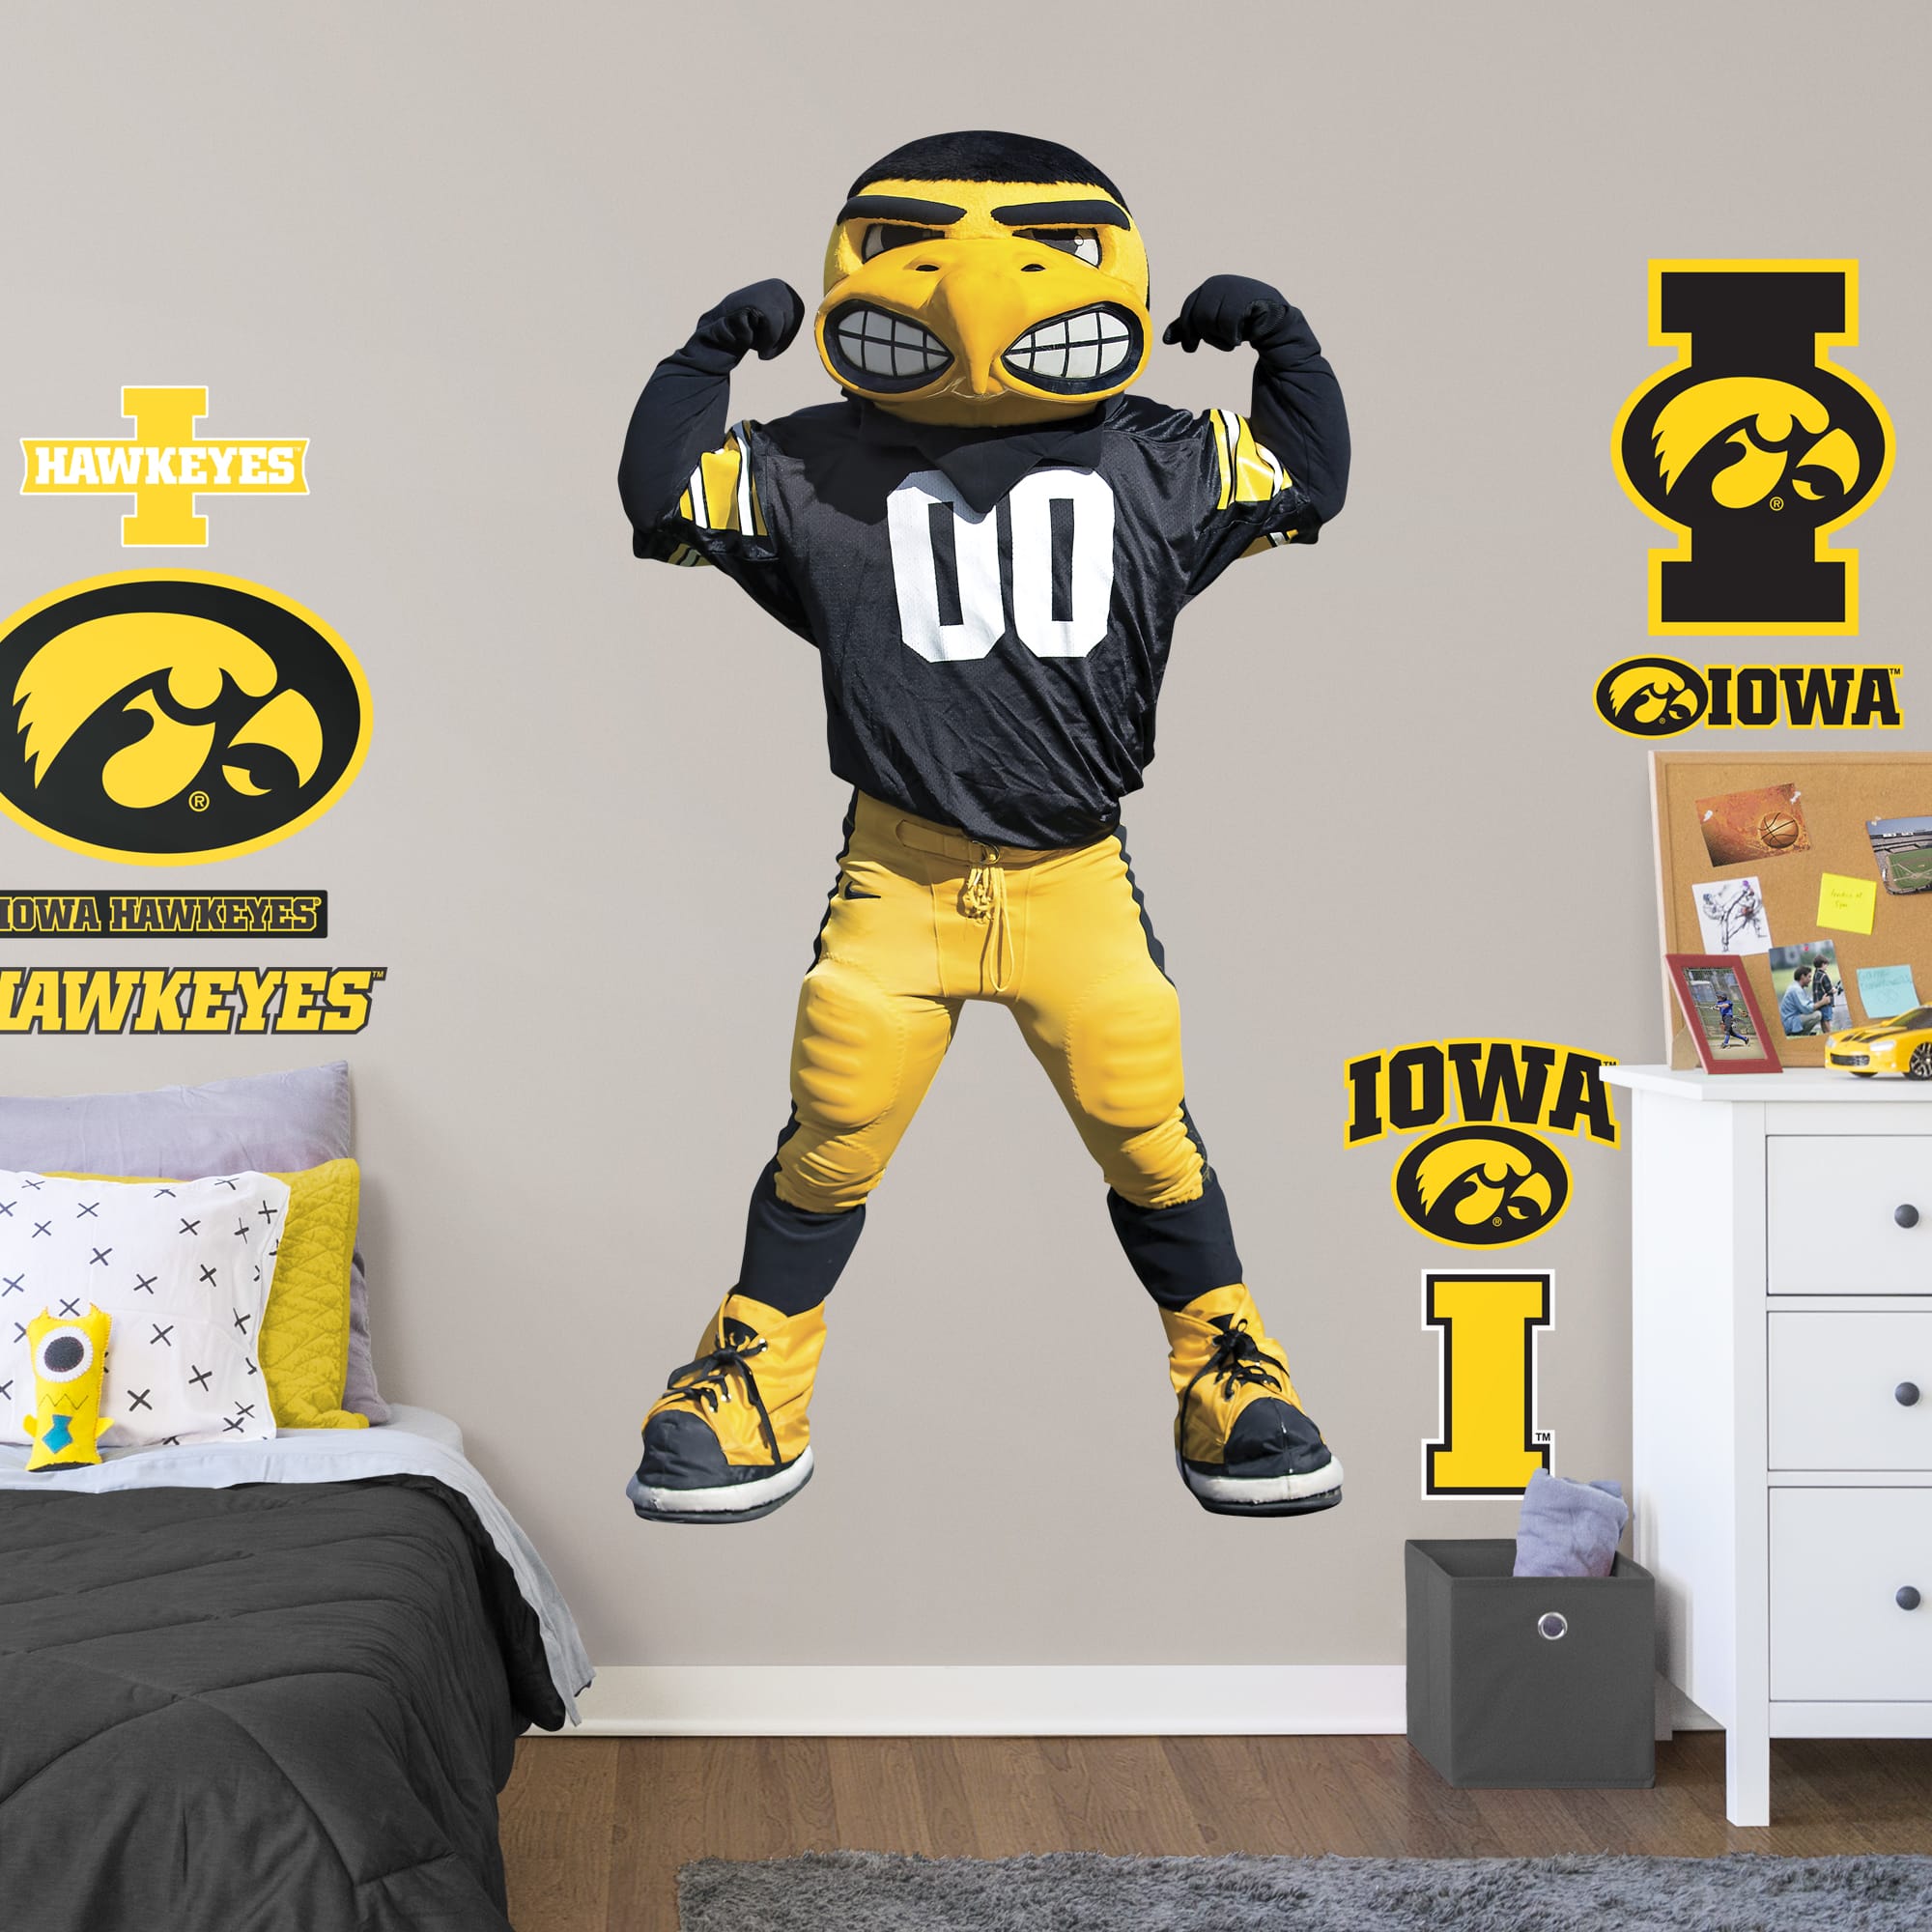 Iowa Hawkeyes: Herky Mascot - Officially Licensed Removable Wall Decal Life-Size Character + 1 Decal (40"W x 77"H) by Fathead |